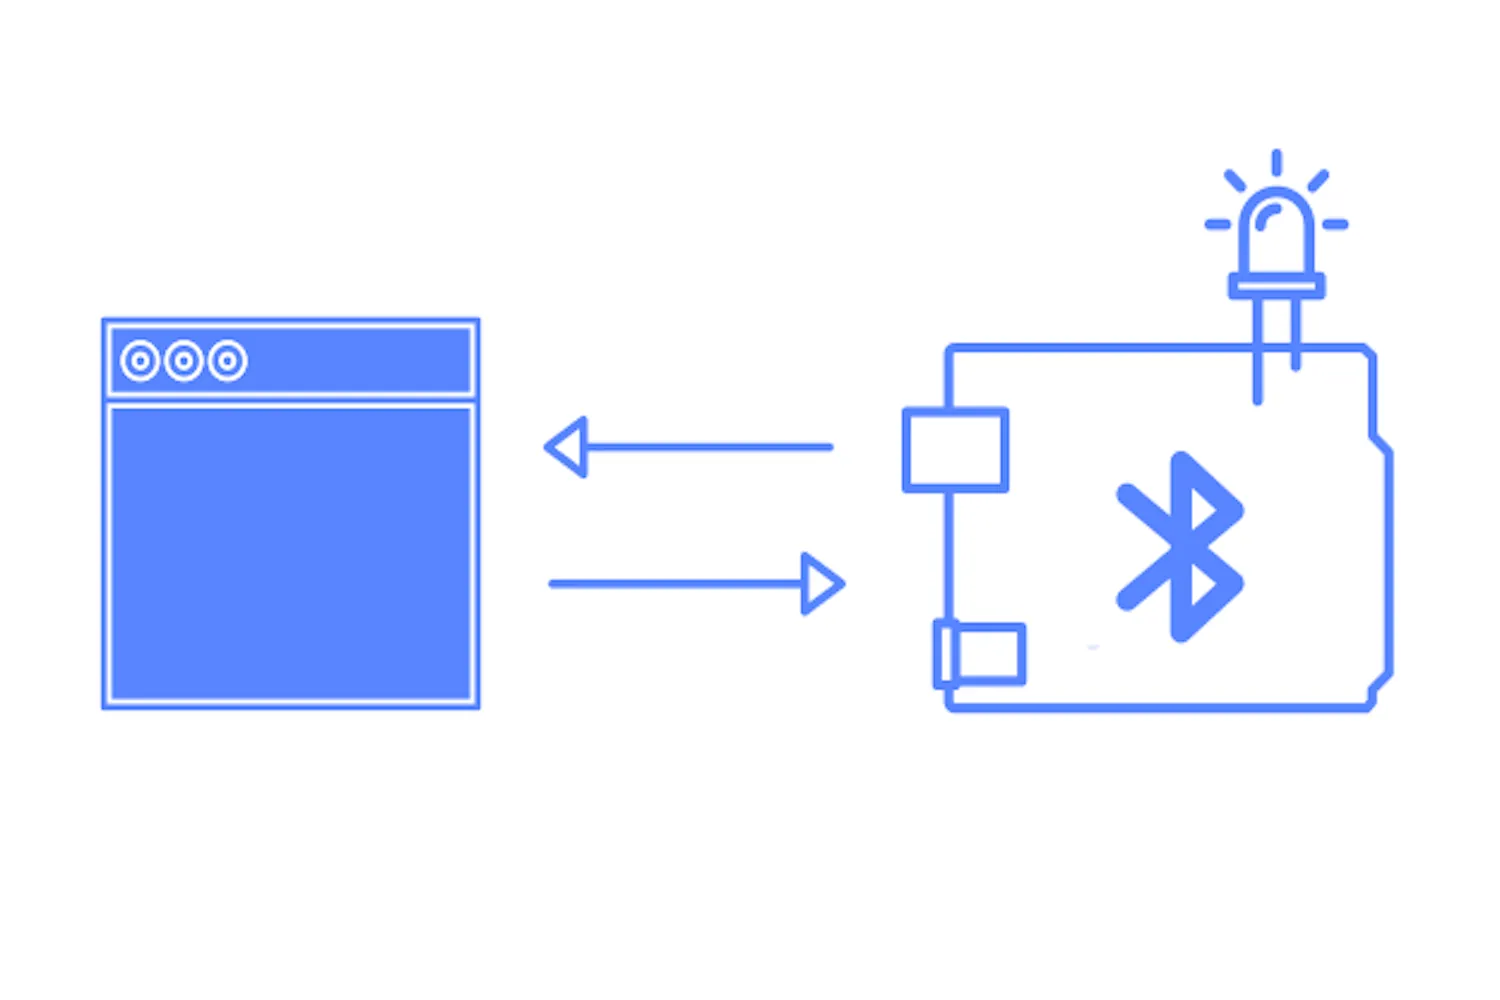 A browser window and a chip with an LED and a Bluetooth icon exchanging information via arrows back and forth